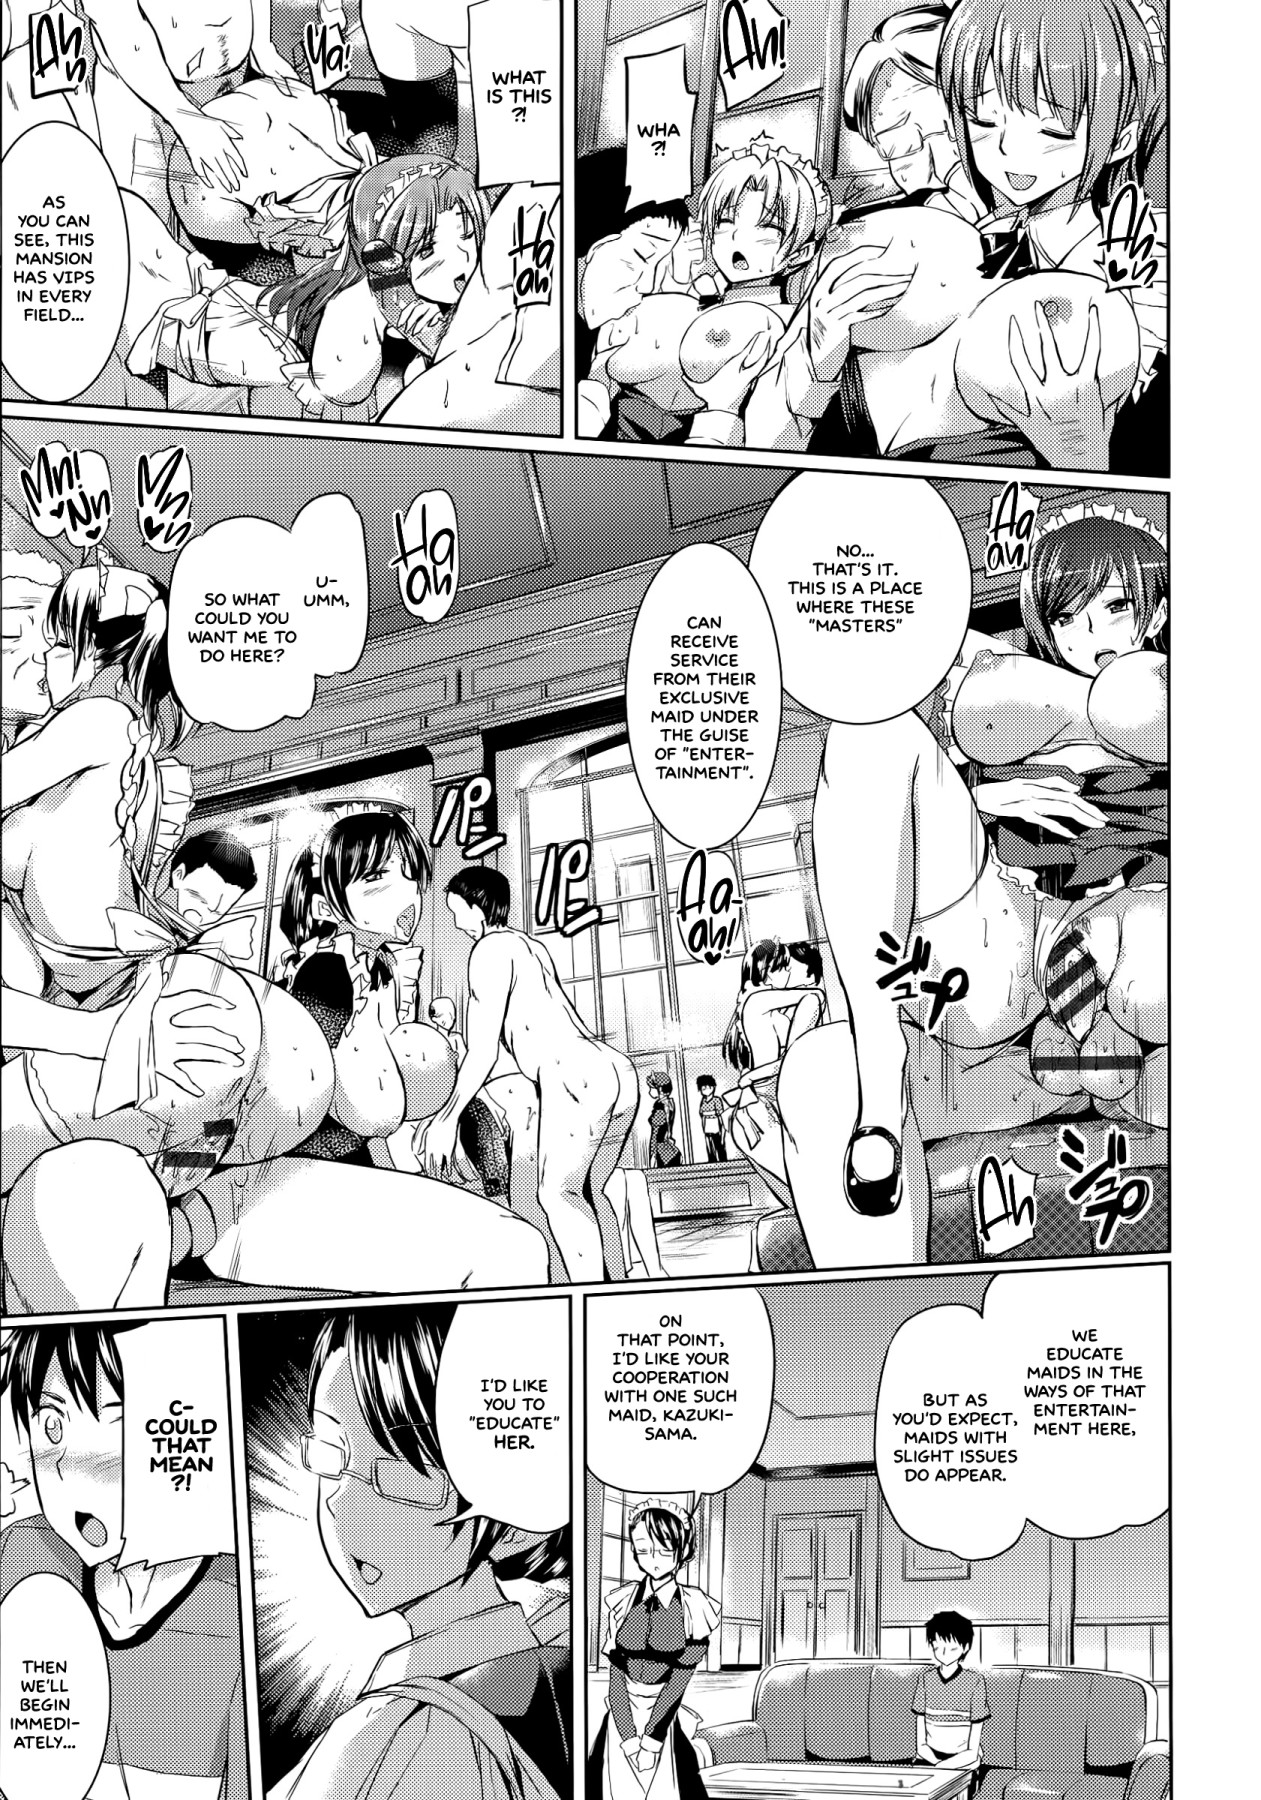 Hentai Manga Comic-The Young Lady's Maid Situation-Chapter 4-2